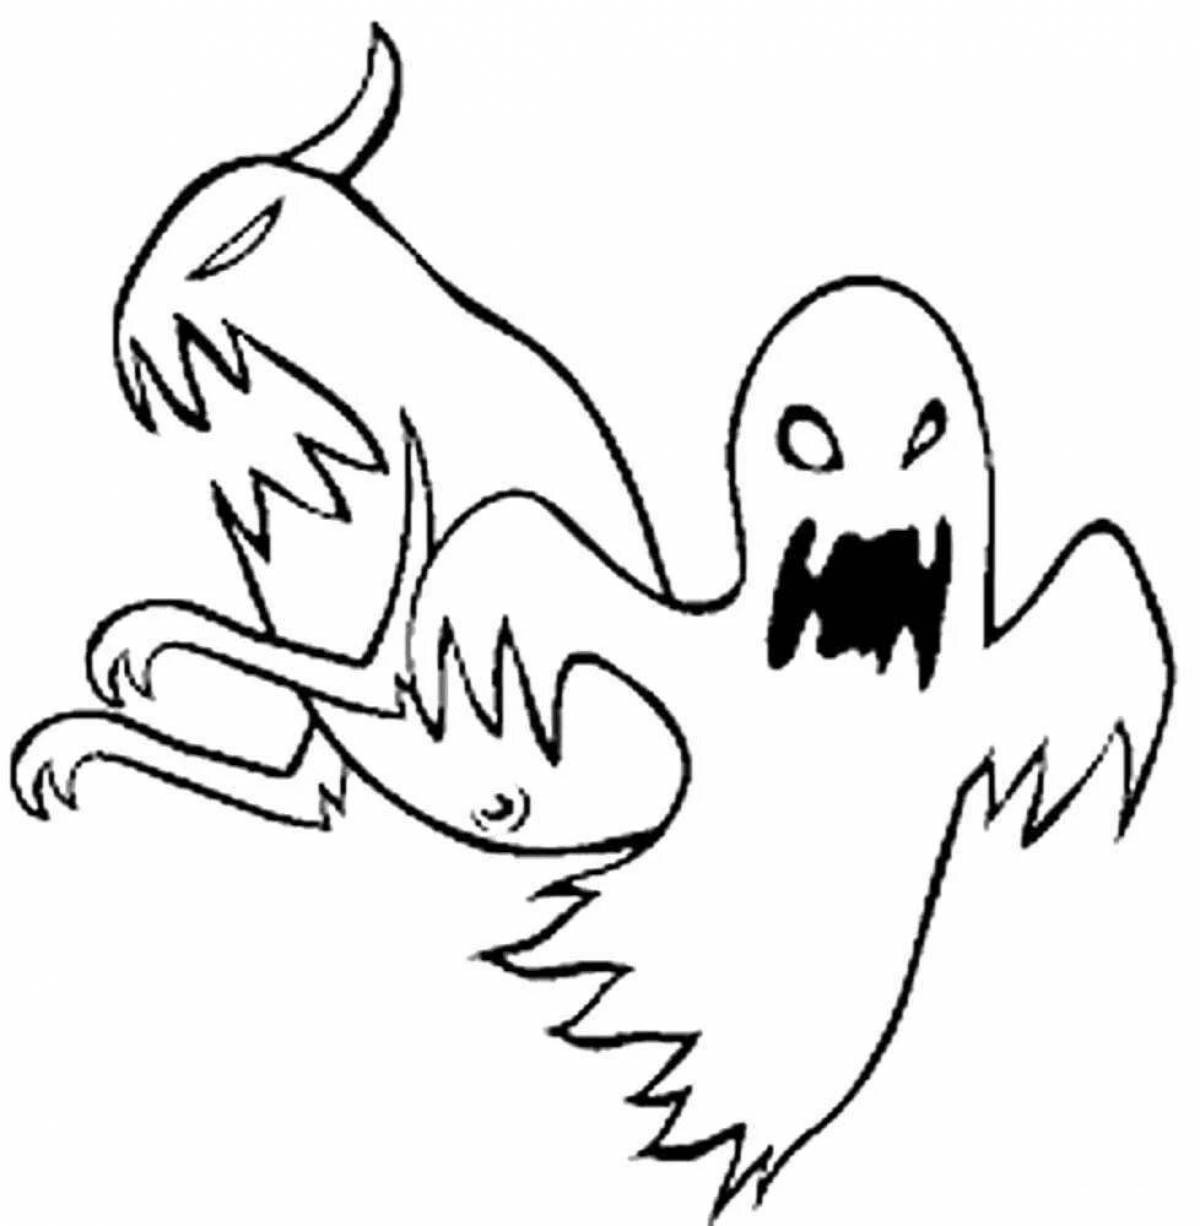 Frustrating ghost coloring page